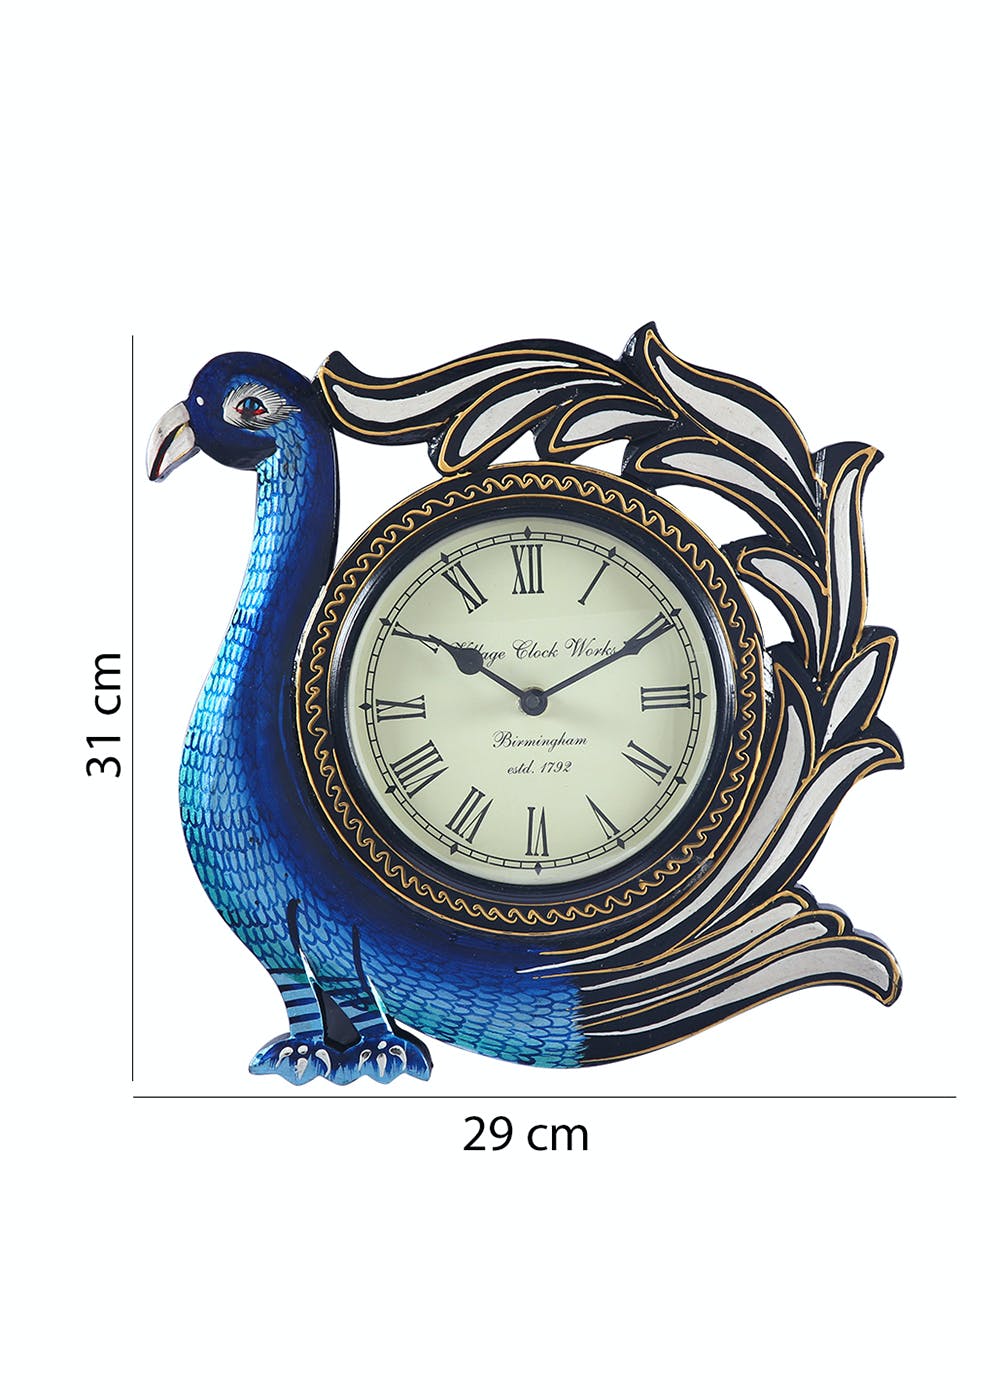 Peacock Collections – China Watch Shop